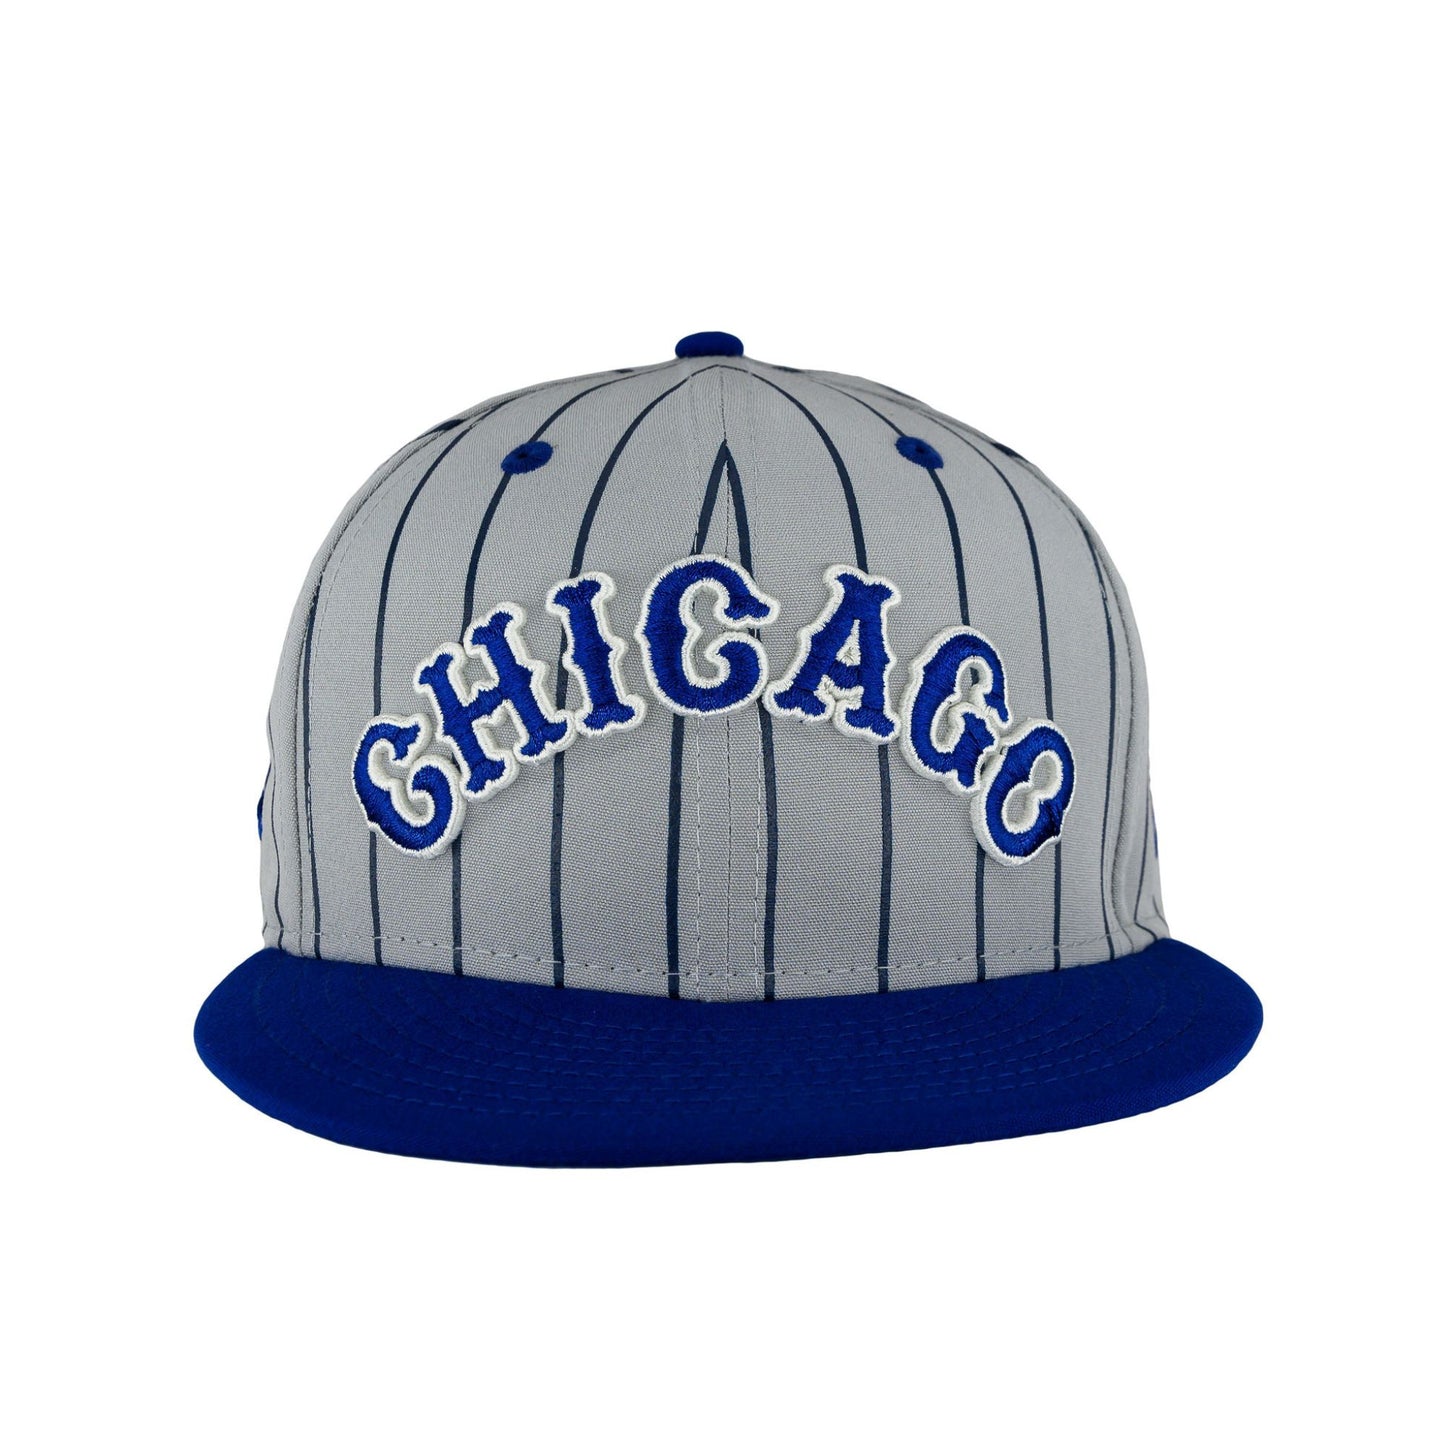 Chicago Cubs Cooperstown 1914 Grey/UV Navy New Era 9FIFTY Snapback Hat